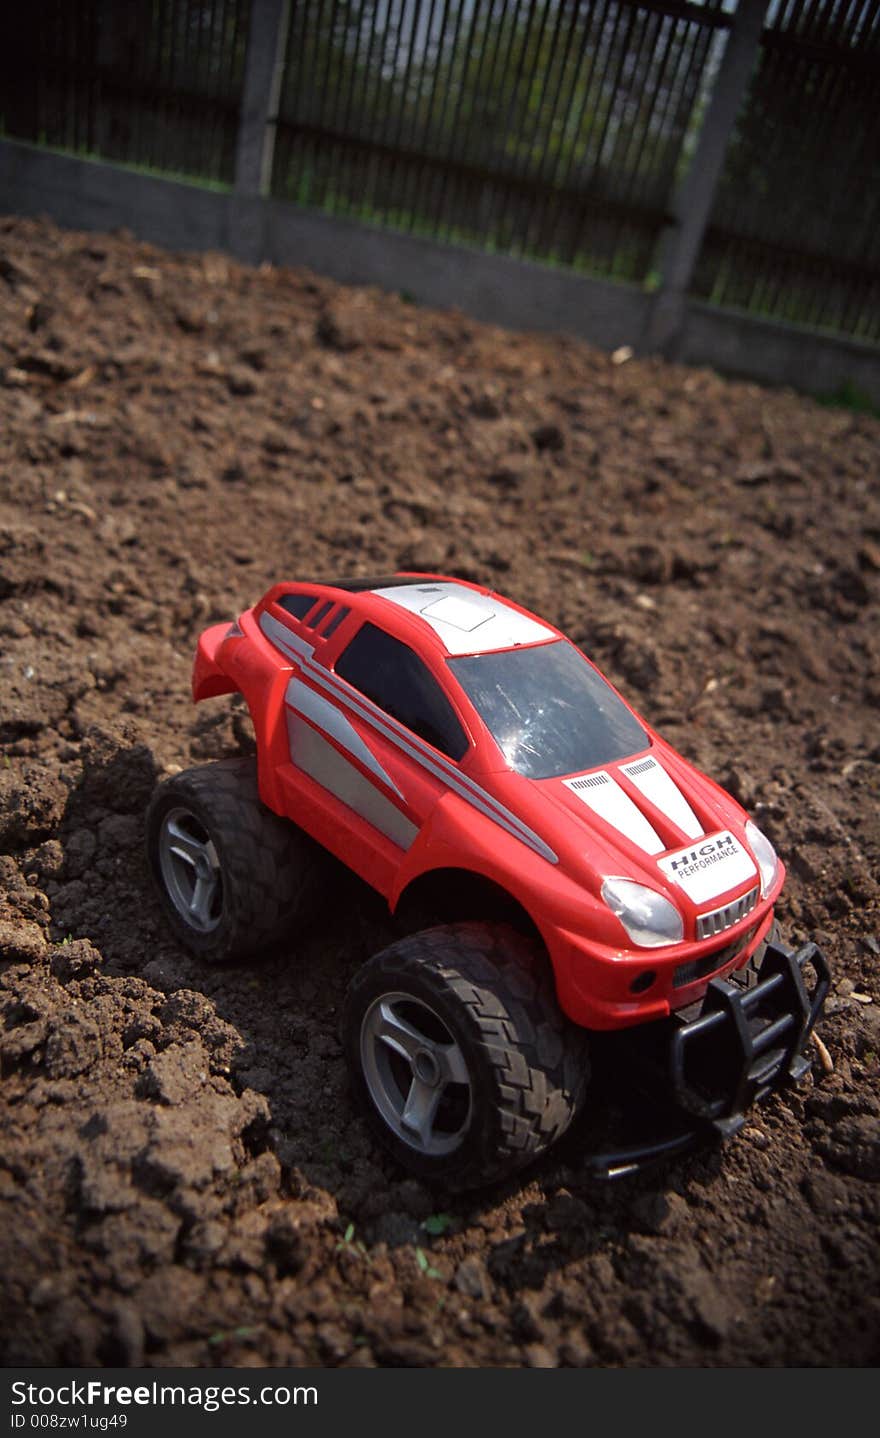 Toy off-road car on ground with slight vignette. Film scan.